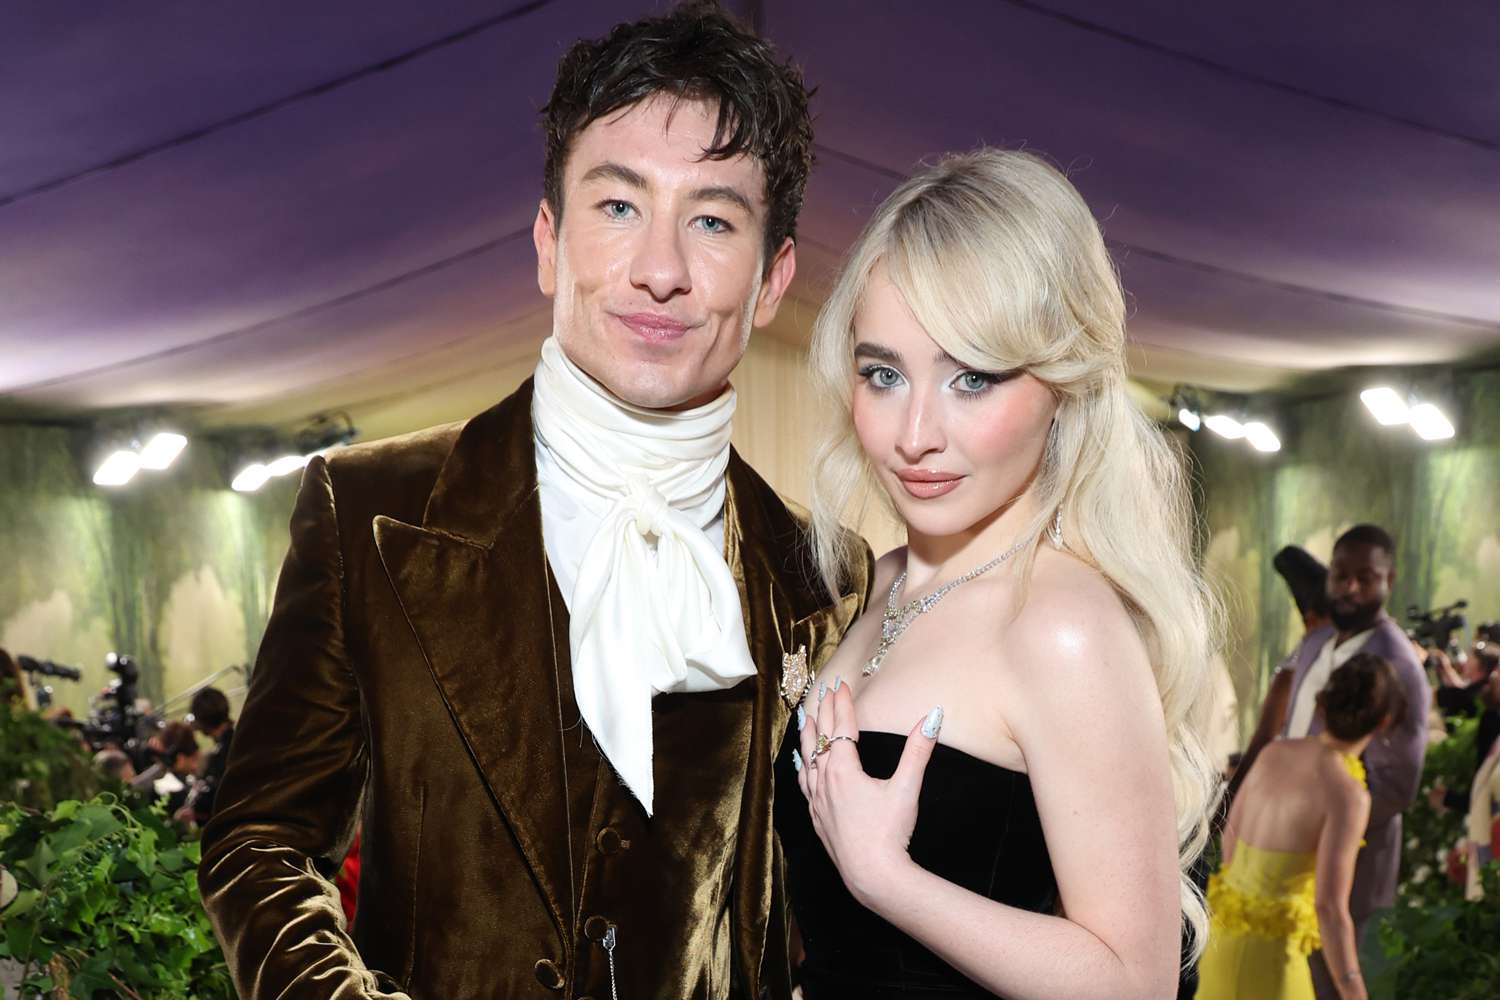 Sabrina Carpenter Calls Barry Keoghan 'One of the Best Actors of This Generation': 'Don't Want to Sound Biased'